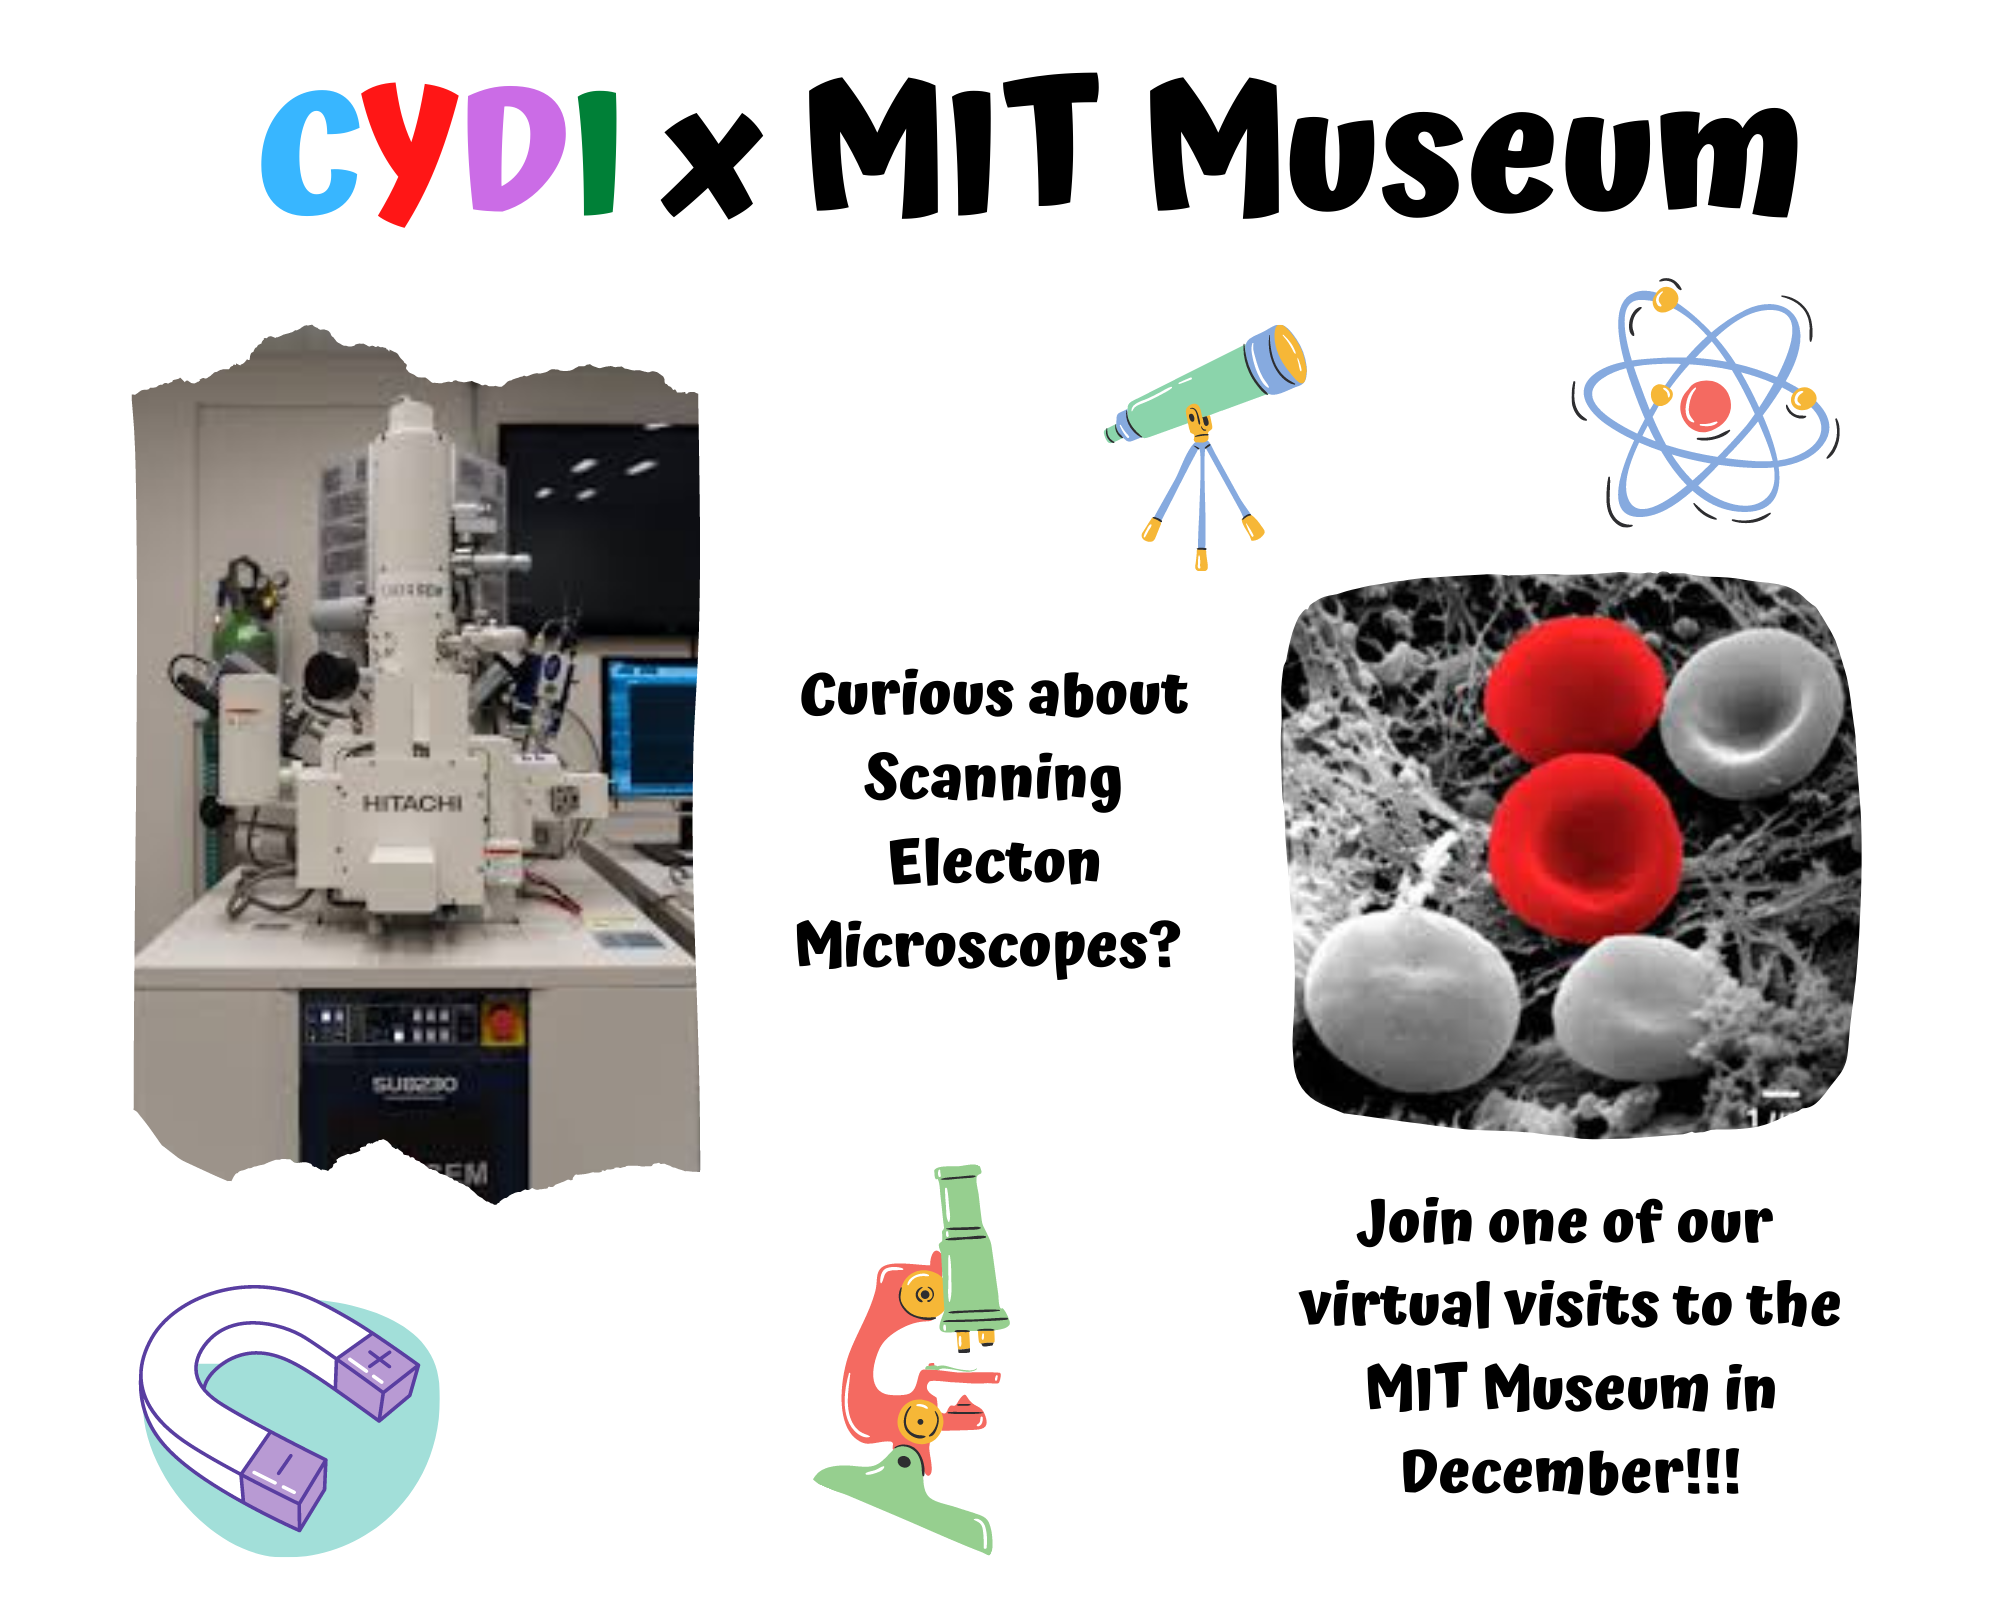 CYDI and MIT Museum